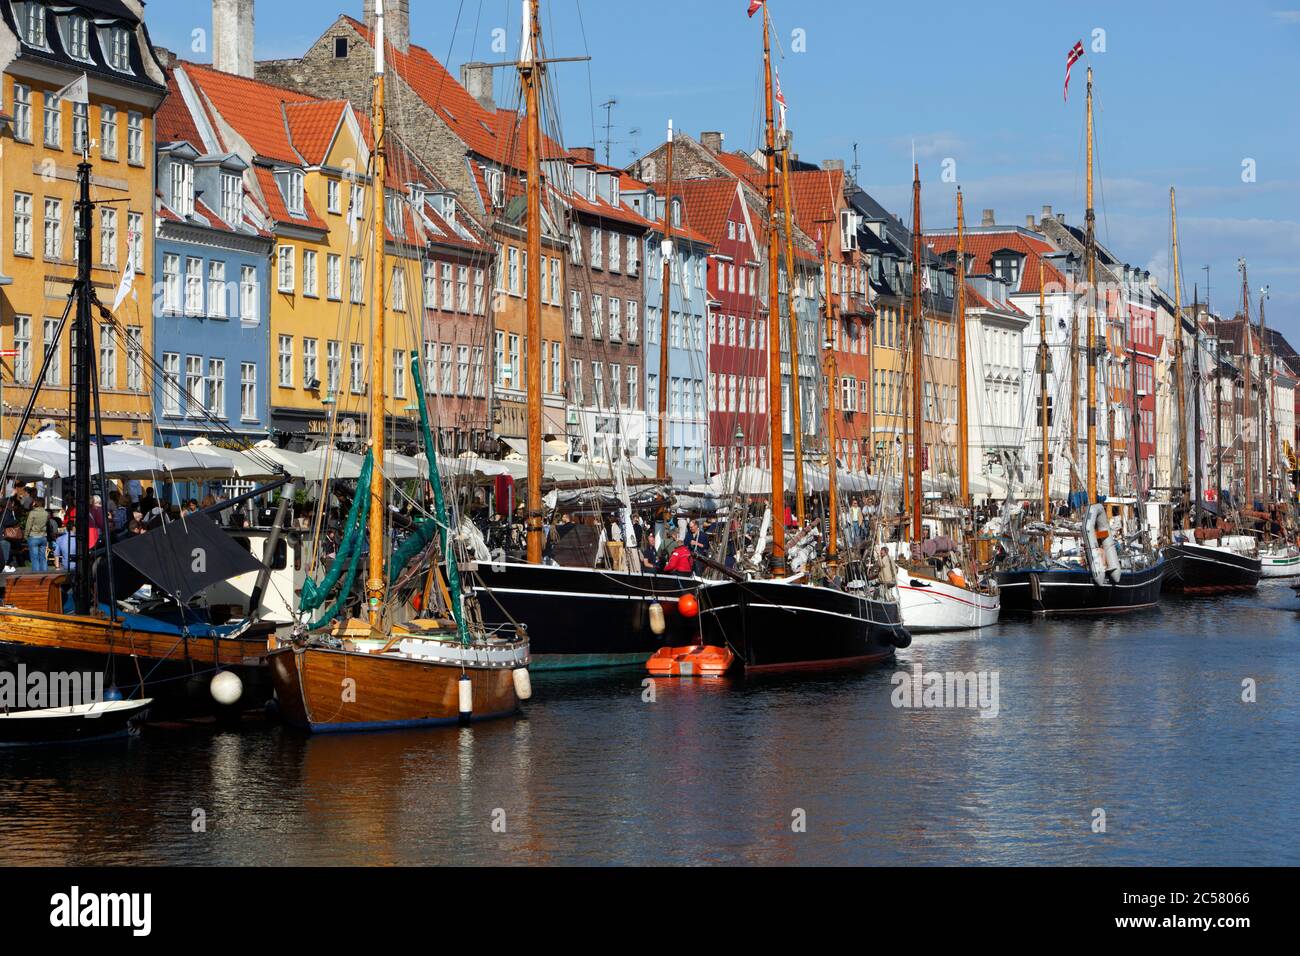 View along Nyhavn (New Harbour) canal lined with boats and former merchant's houses Stock Photo